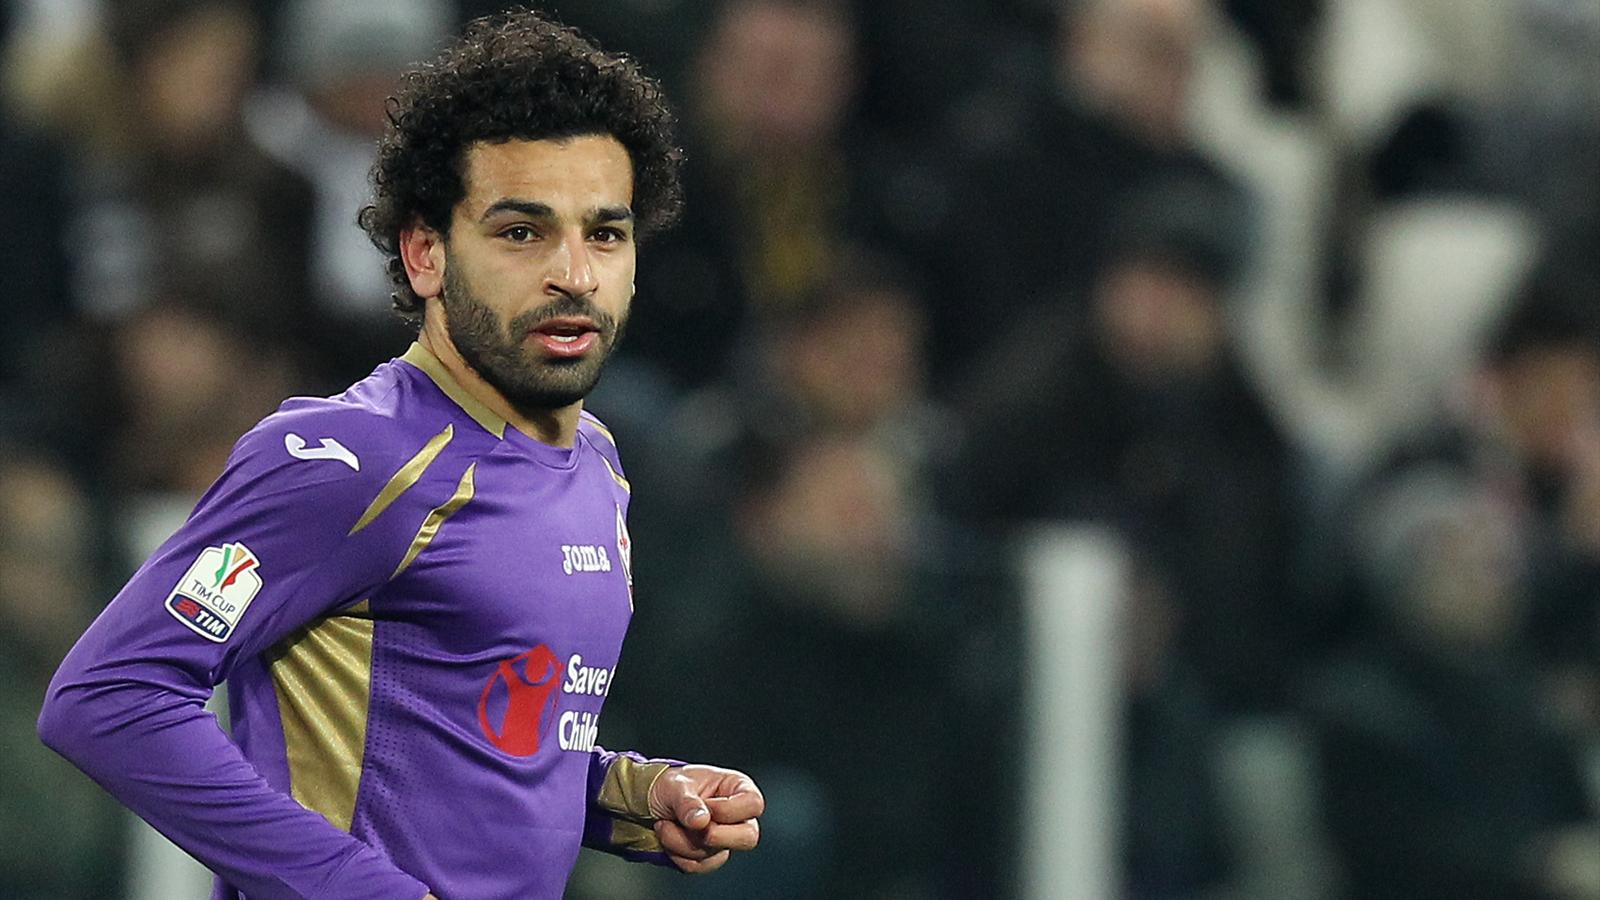 Sky: Salah-Fiorentina meeting is done, here is the outcome…